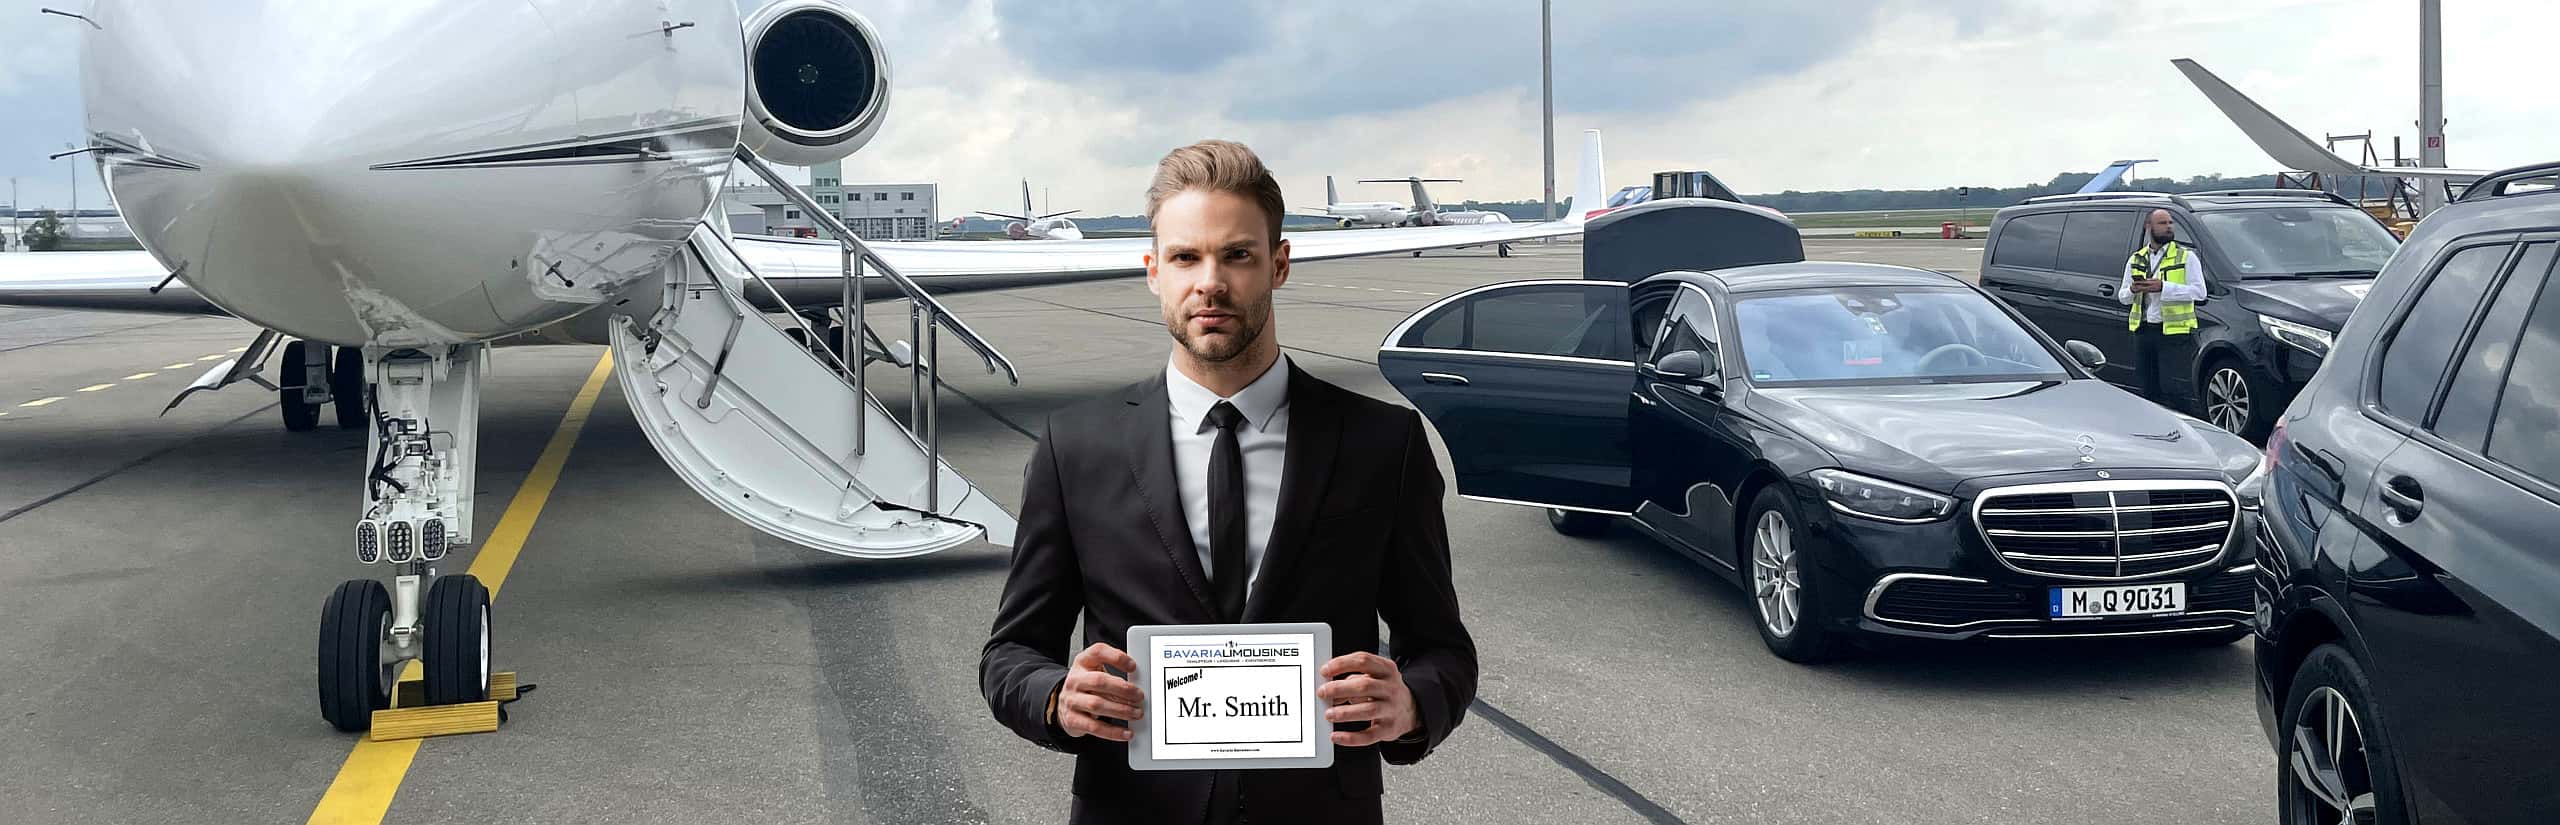 Limousine service and chauffeur service in Germany